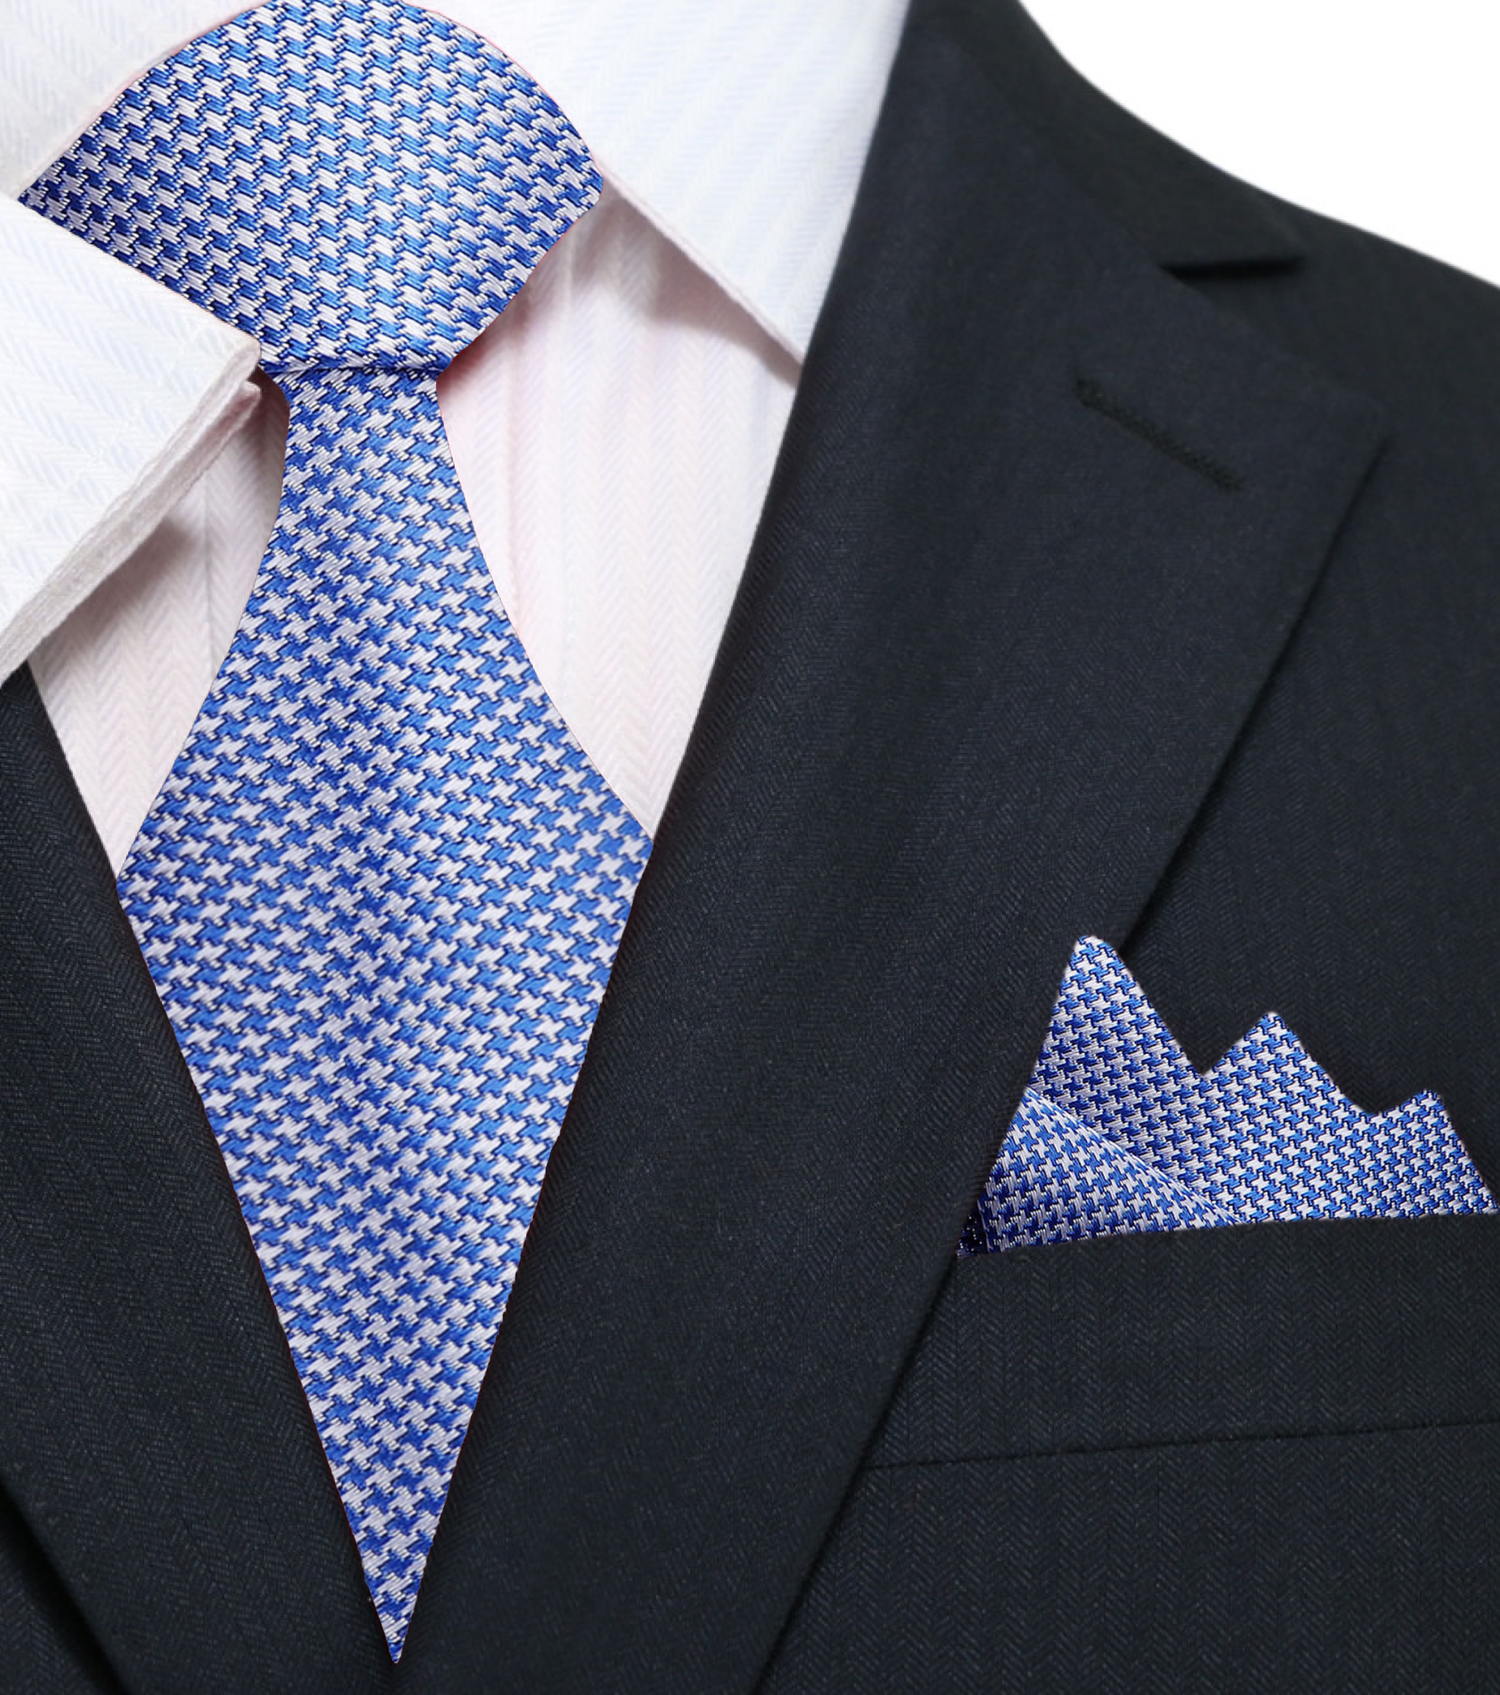 Blue, White Hounds-tooth Tie and Square